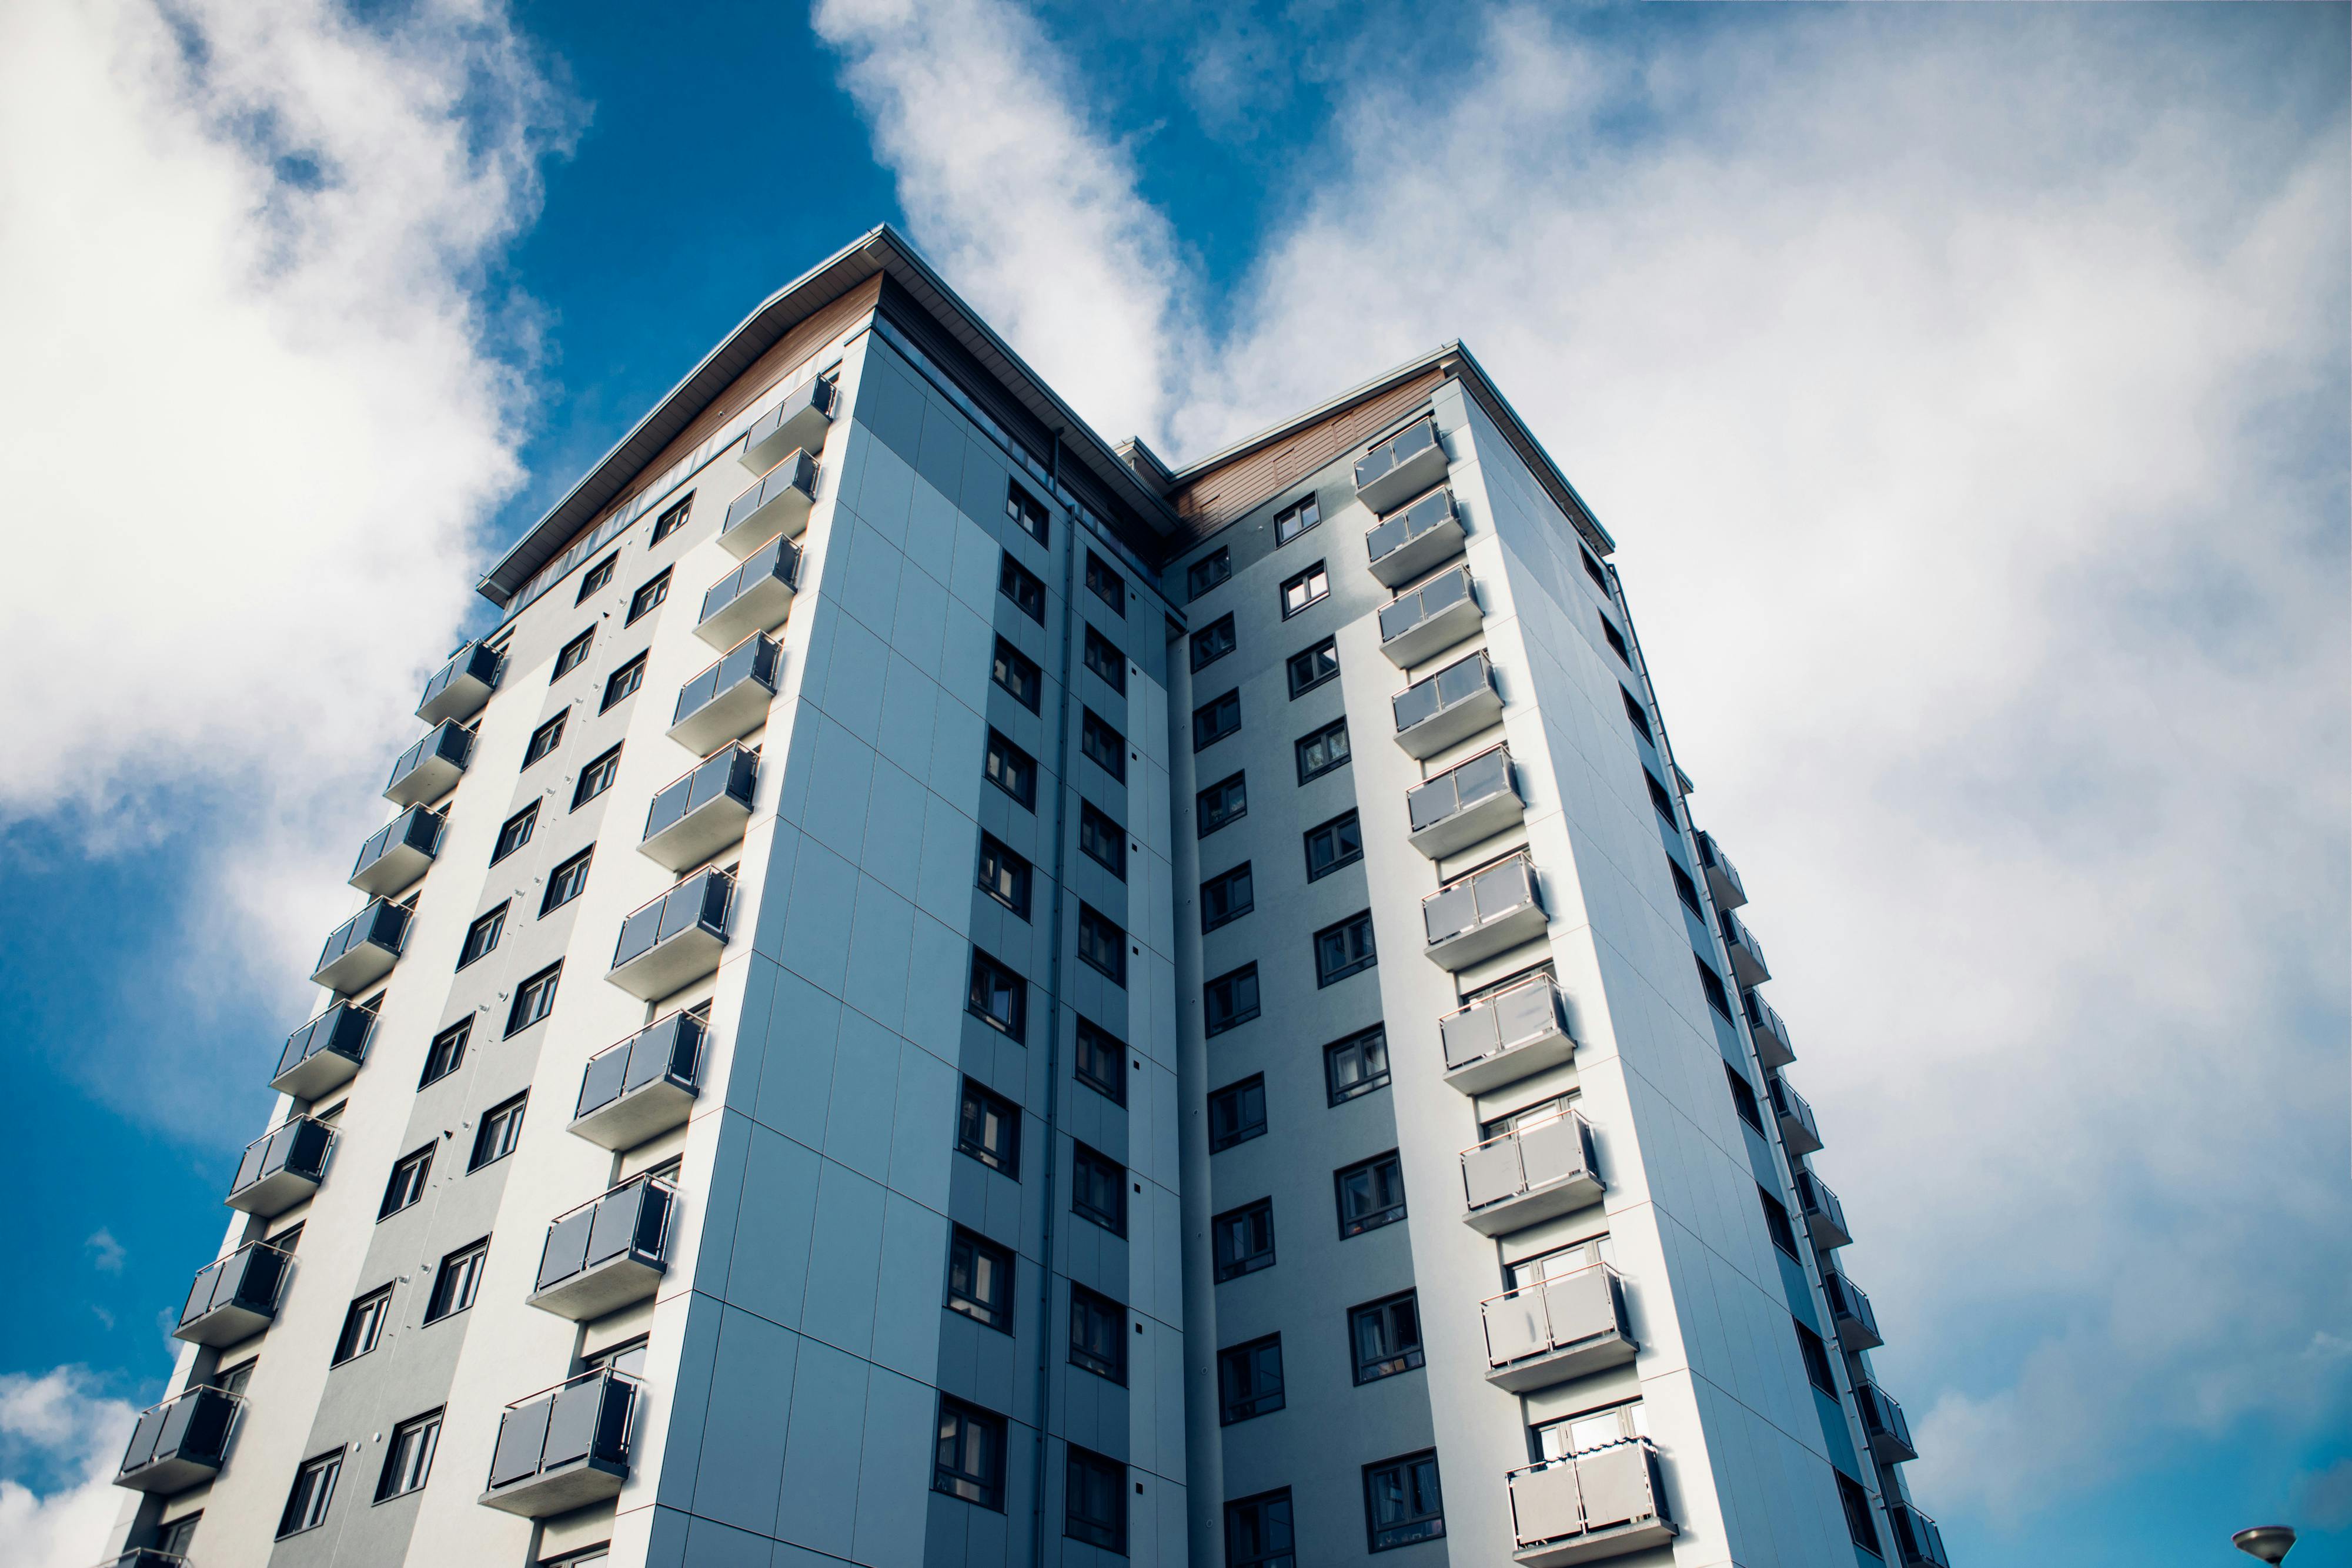 Rockpanel Lion Farm Estate, building, high-rise, residential tower, aesthetics, renovation, energy efficiency, England, fire safety,